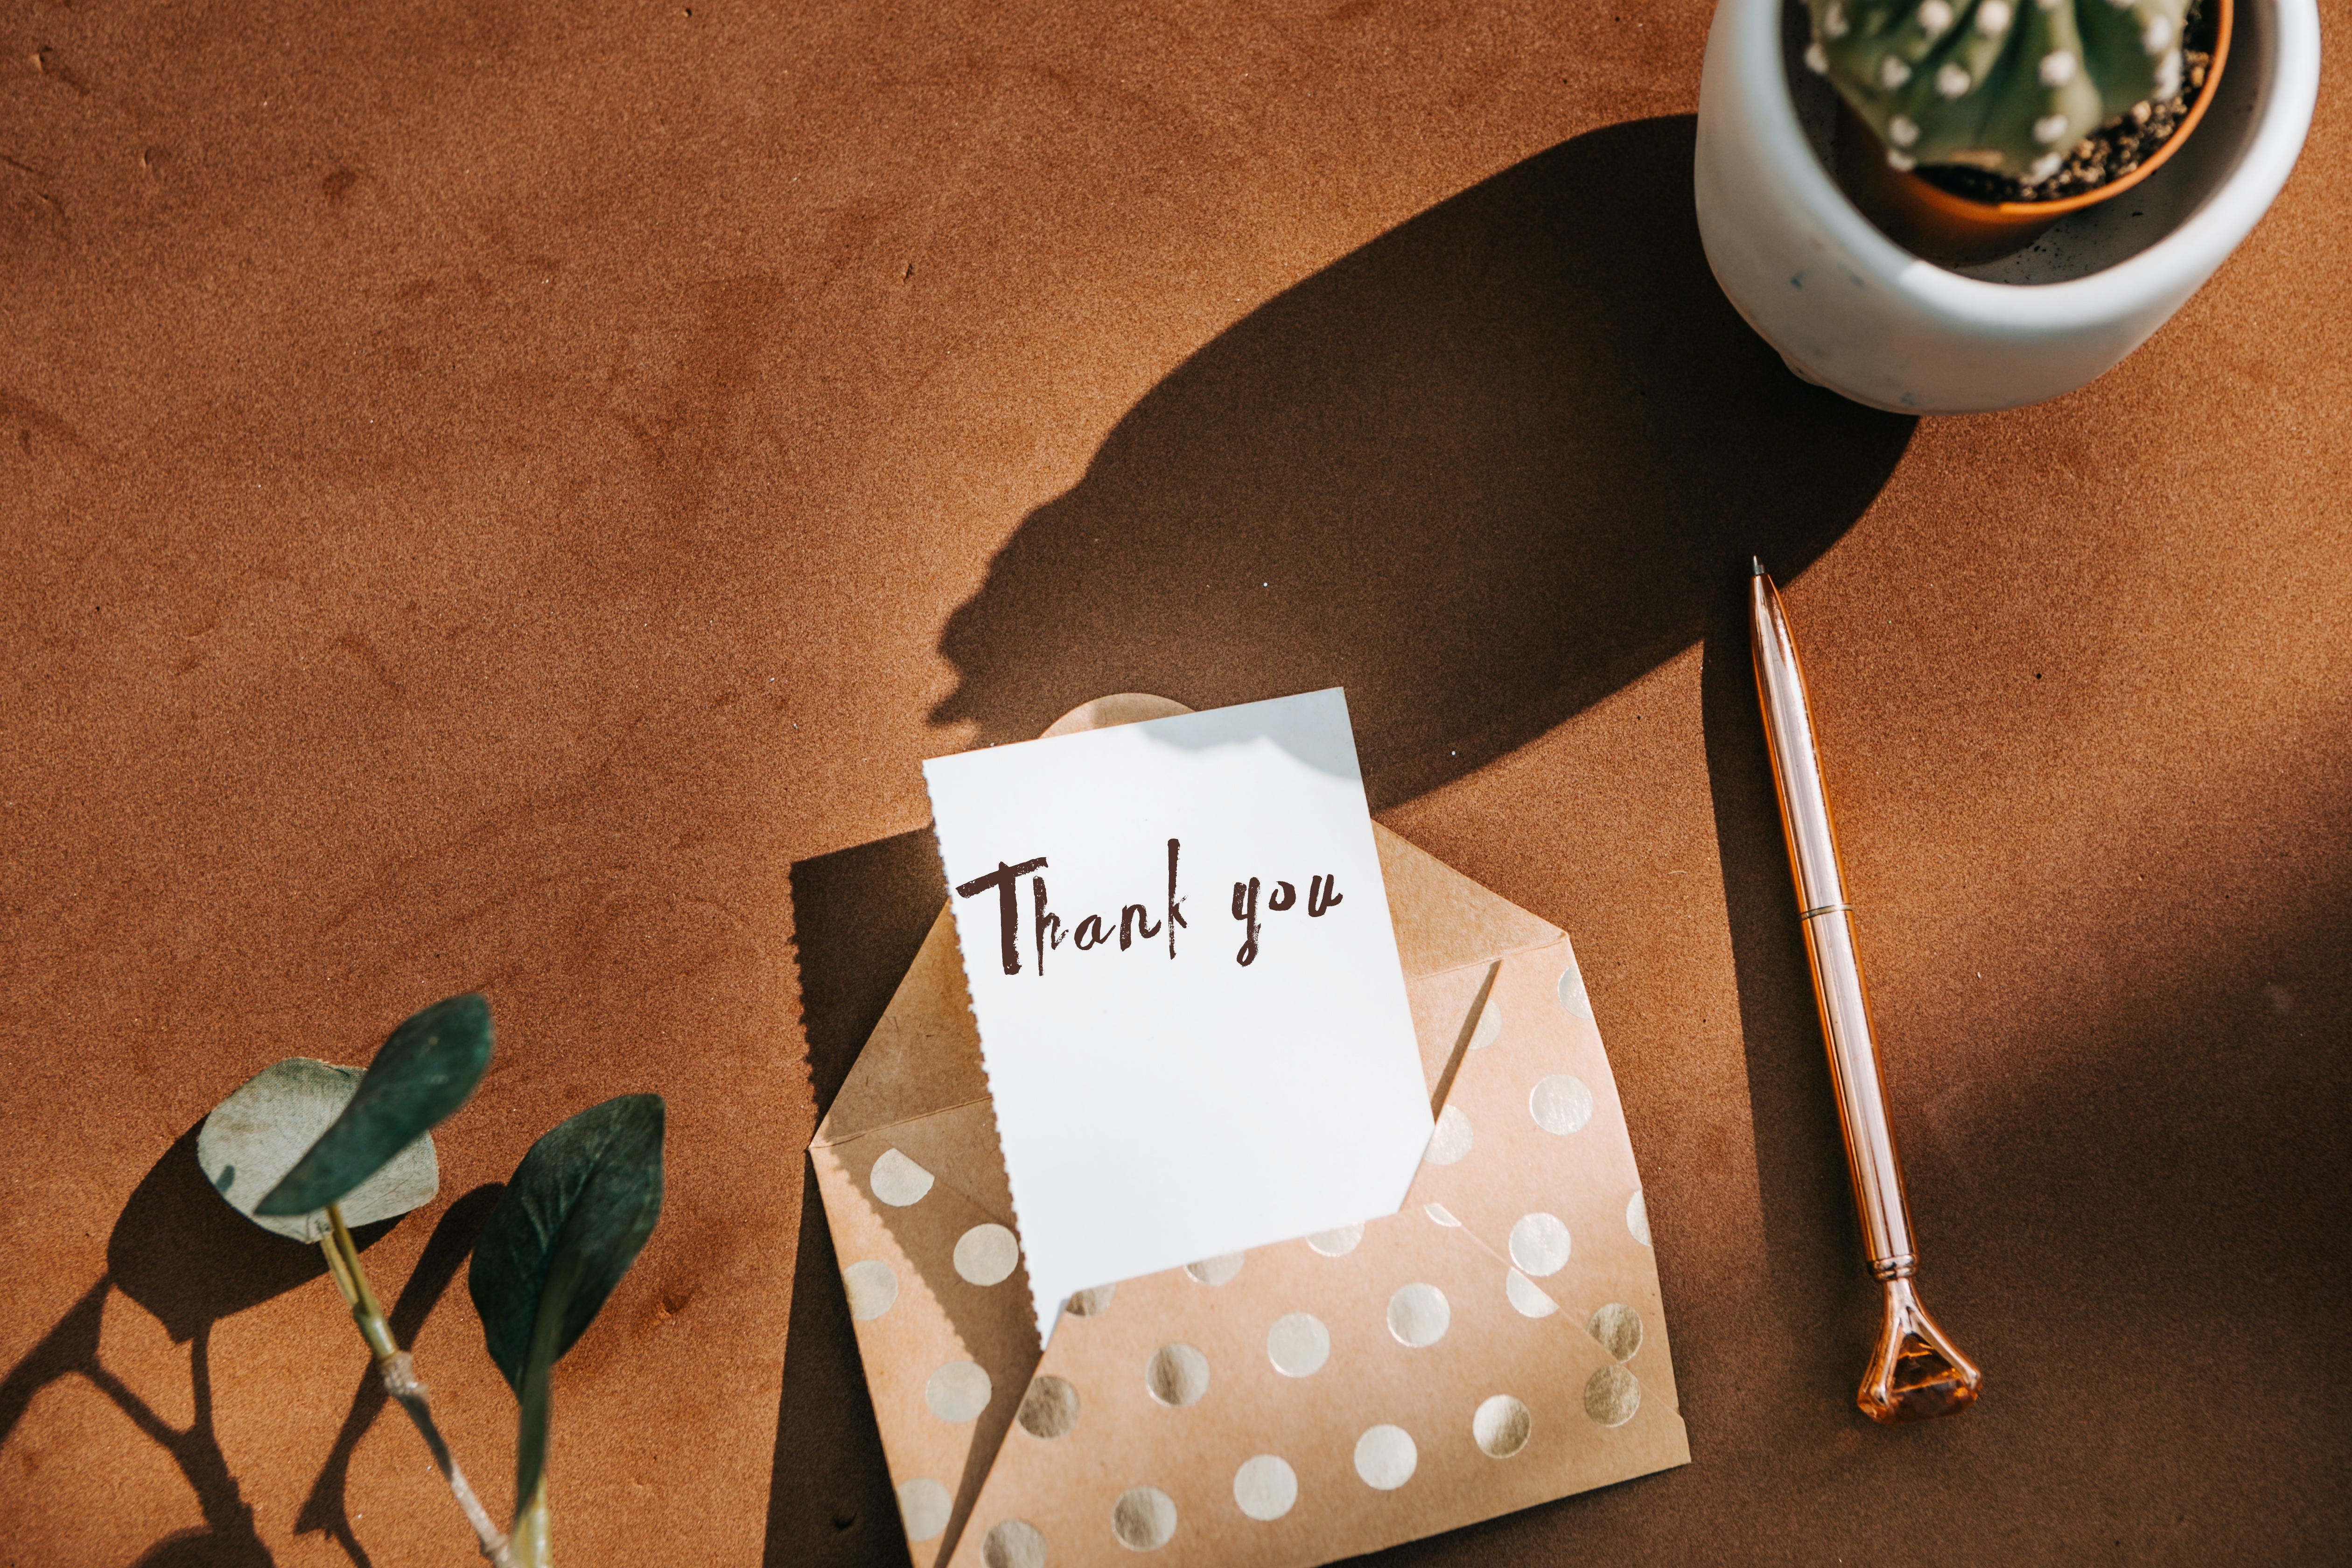 75 Best Thank-You Messages and Words of Appreciation